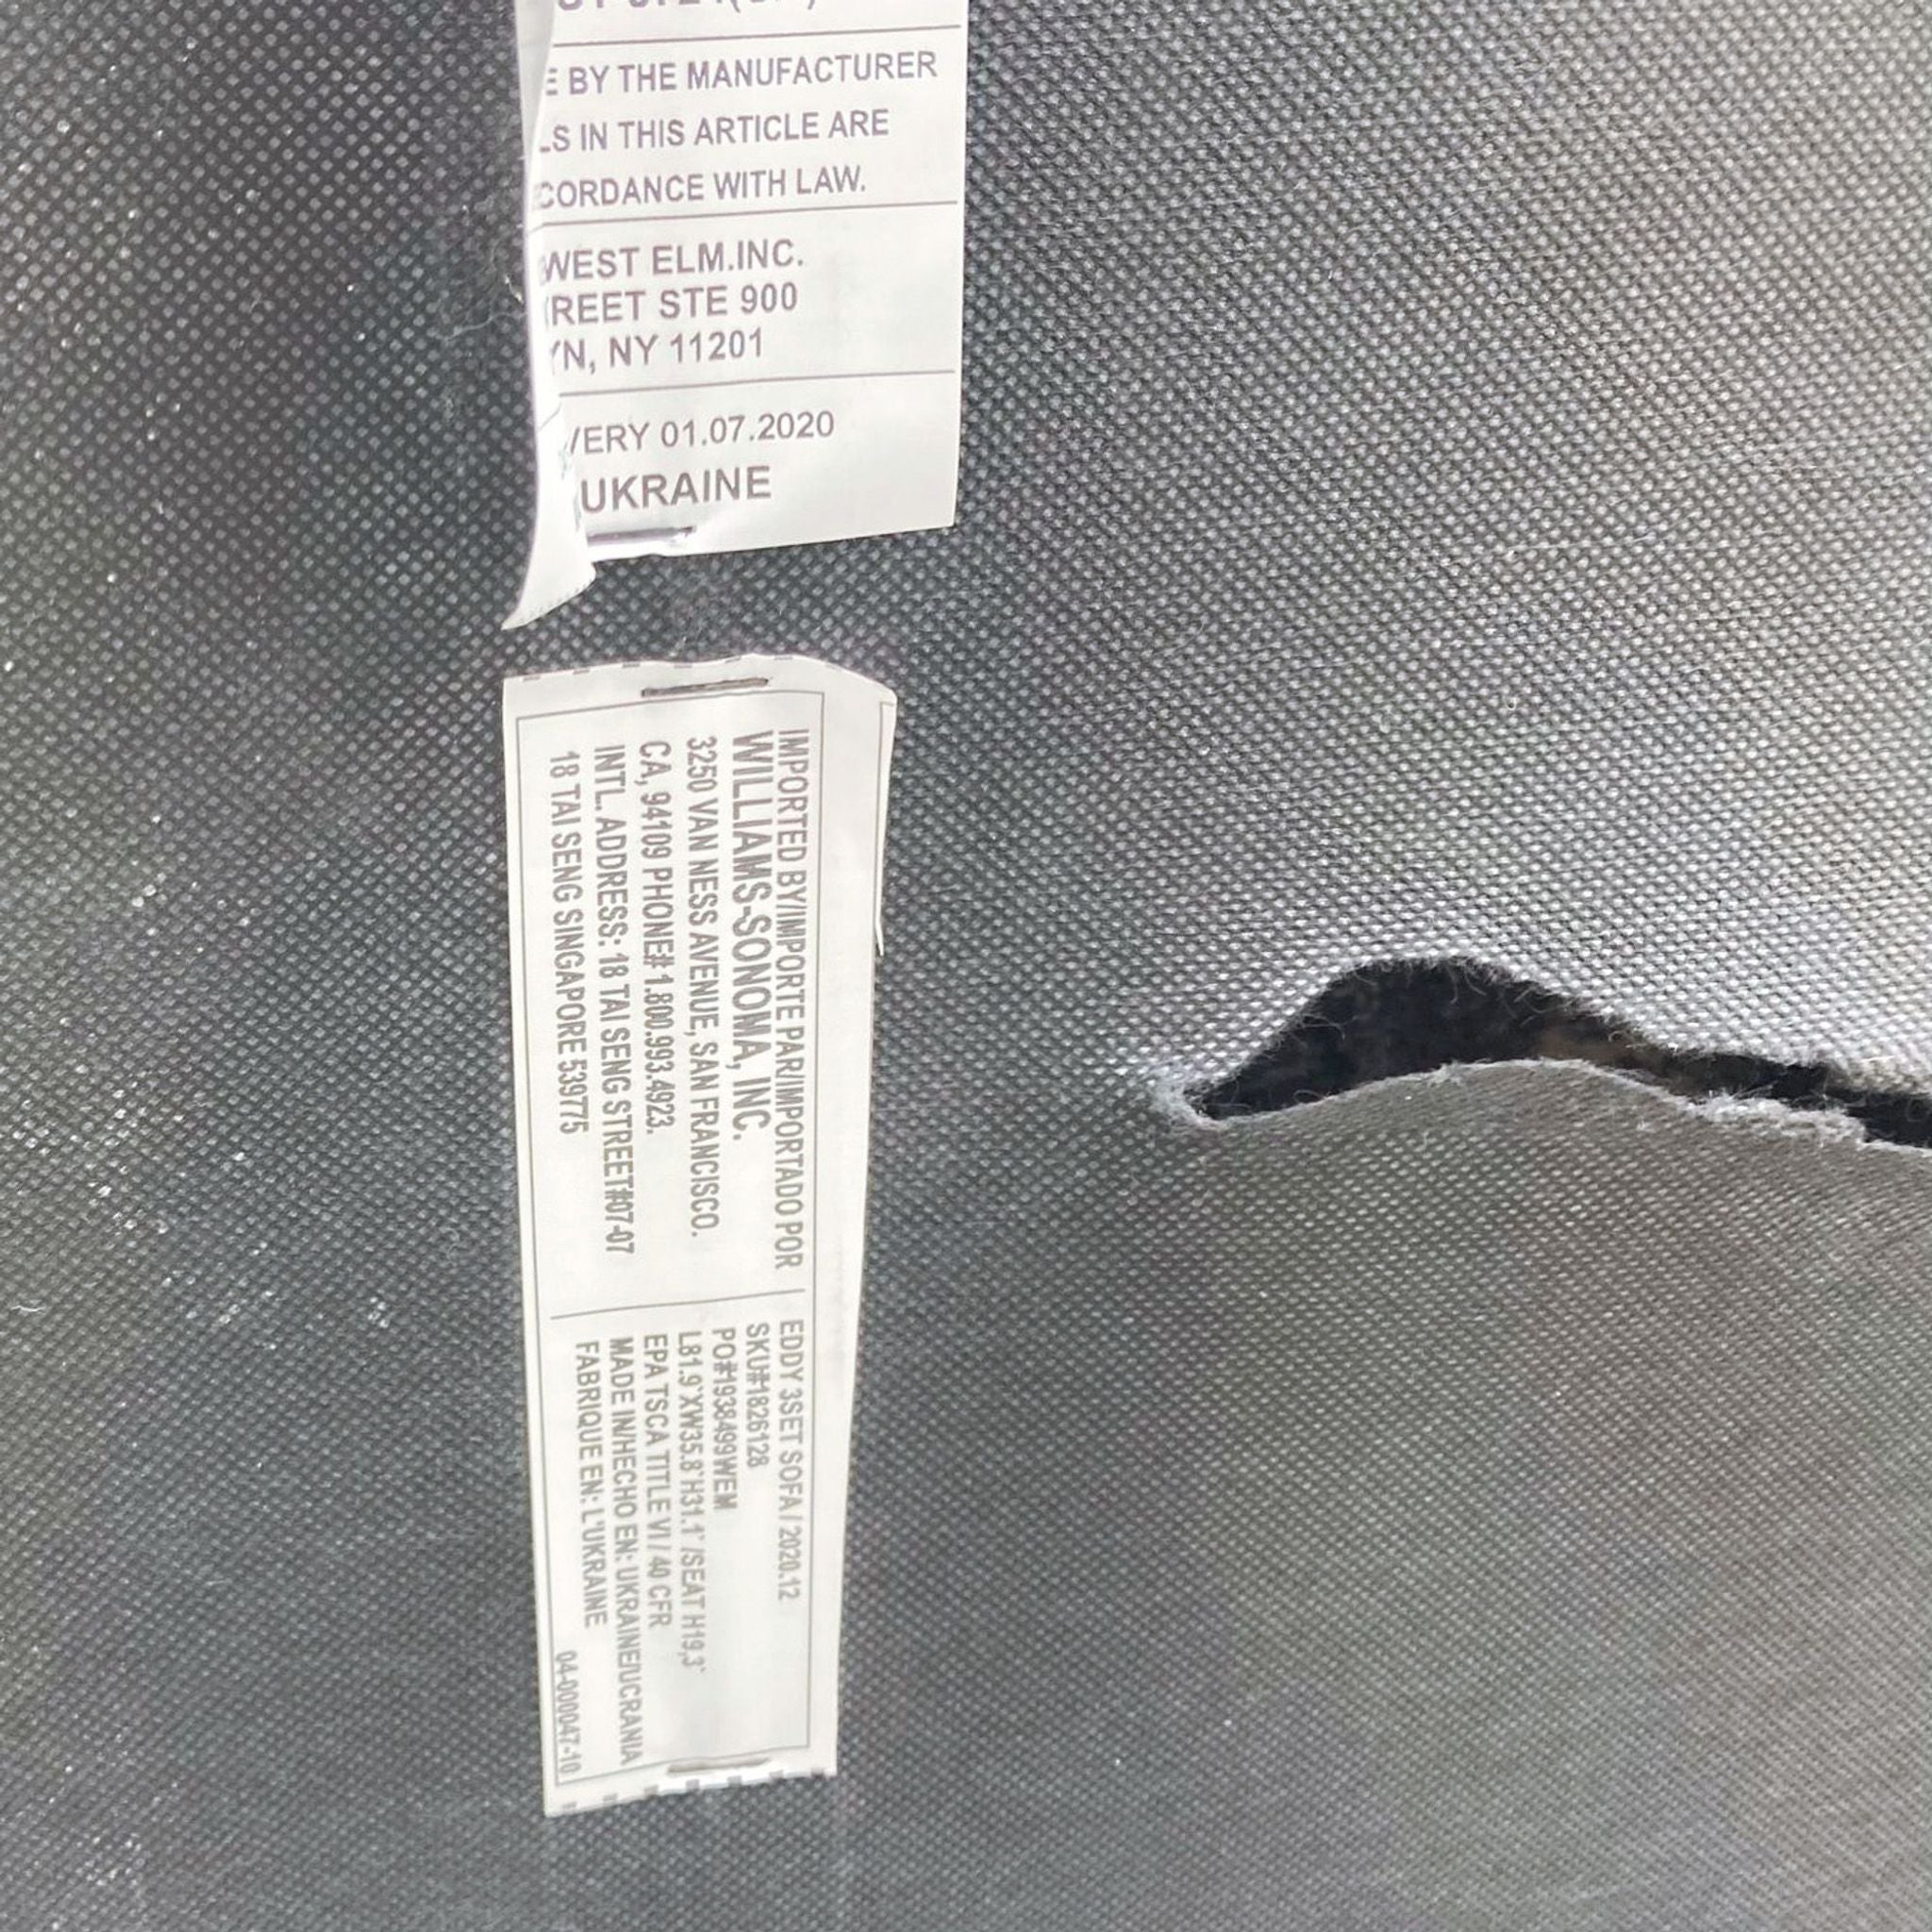 Alt text 2: Close-up of a West Elm sofa label showing materials and compliance information against a textured gray background.